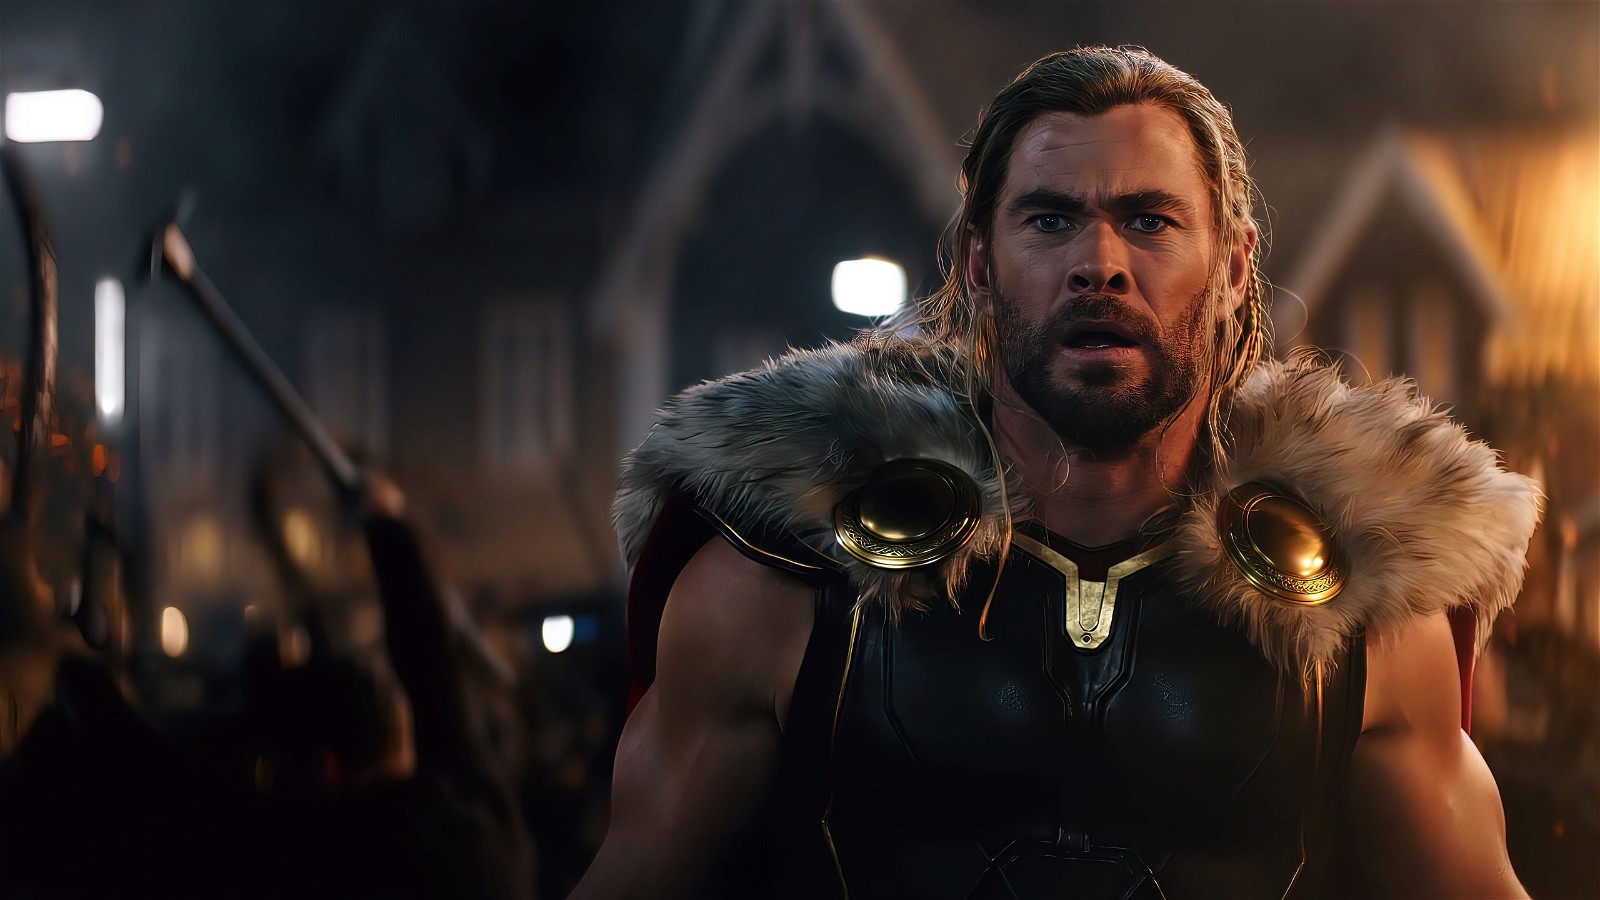 Chris Hemsworth as Thor in Thor: Love and Thunder (2022).